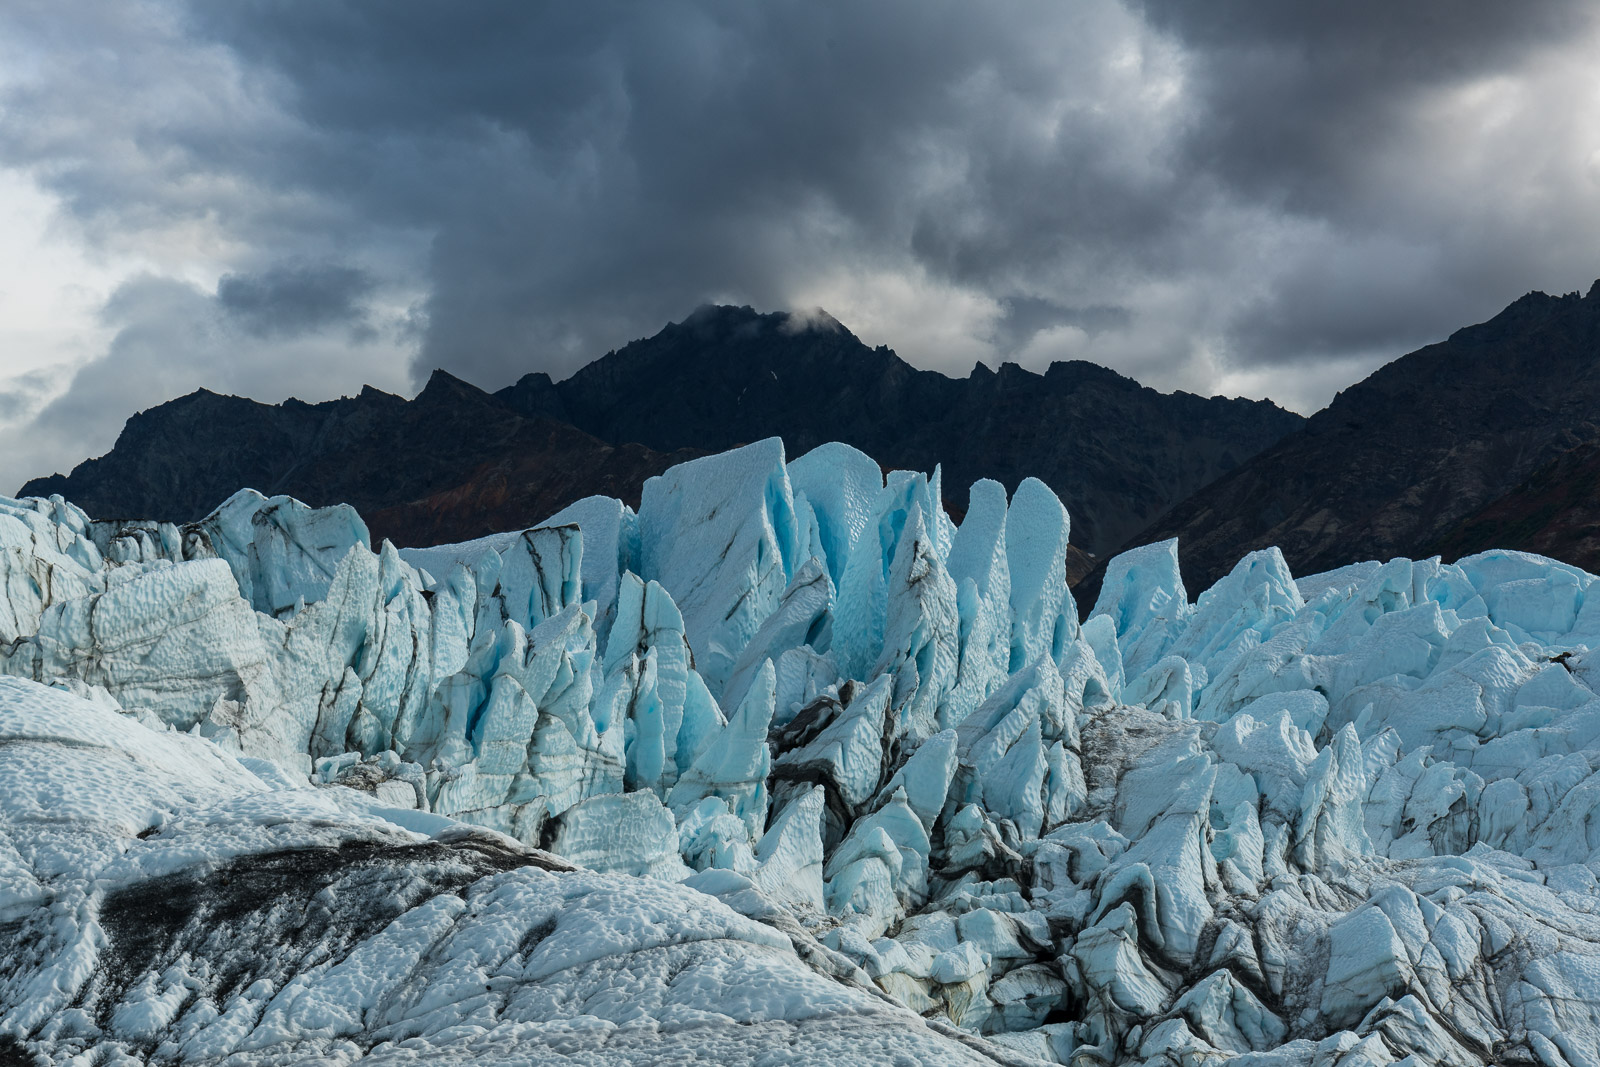 The shape of the "Ice Fall" of Matanuska Glacier perfectly mirrors the shape of a mountain ridge in the background.